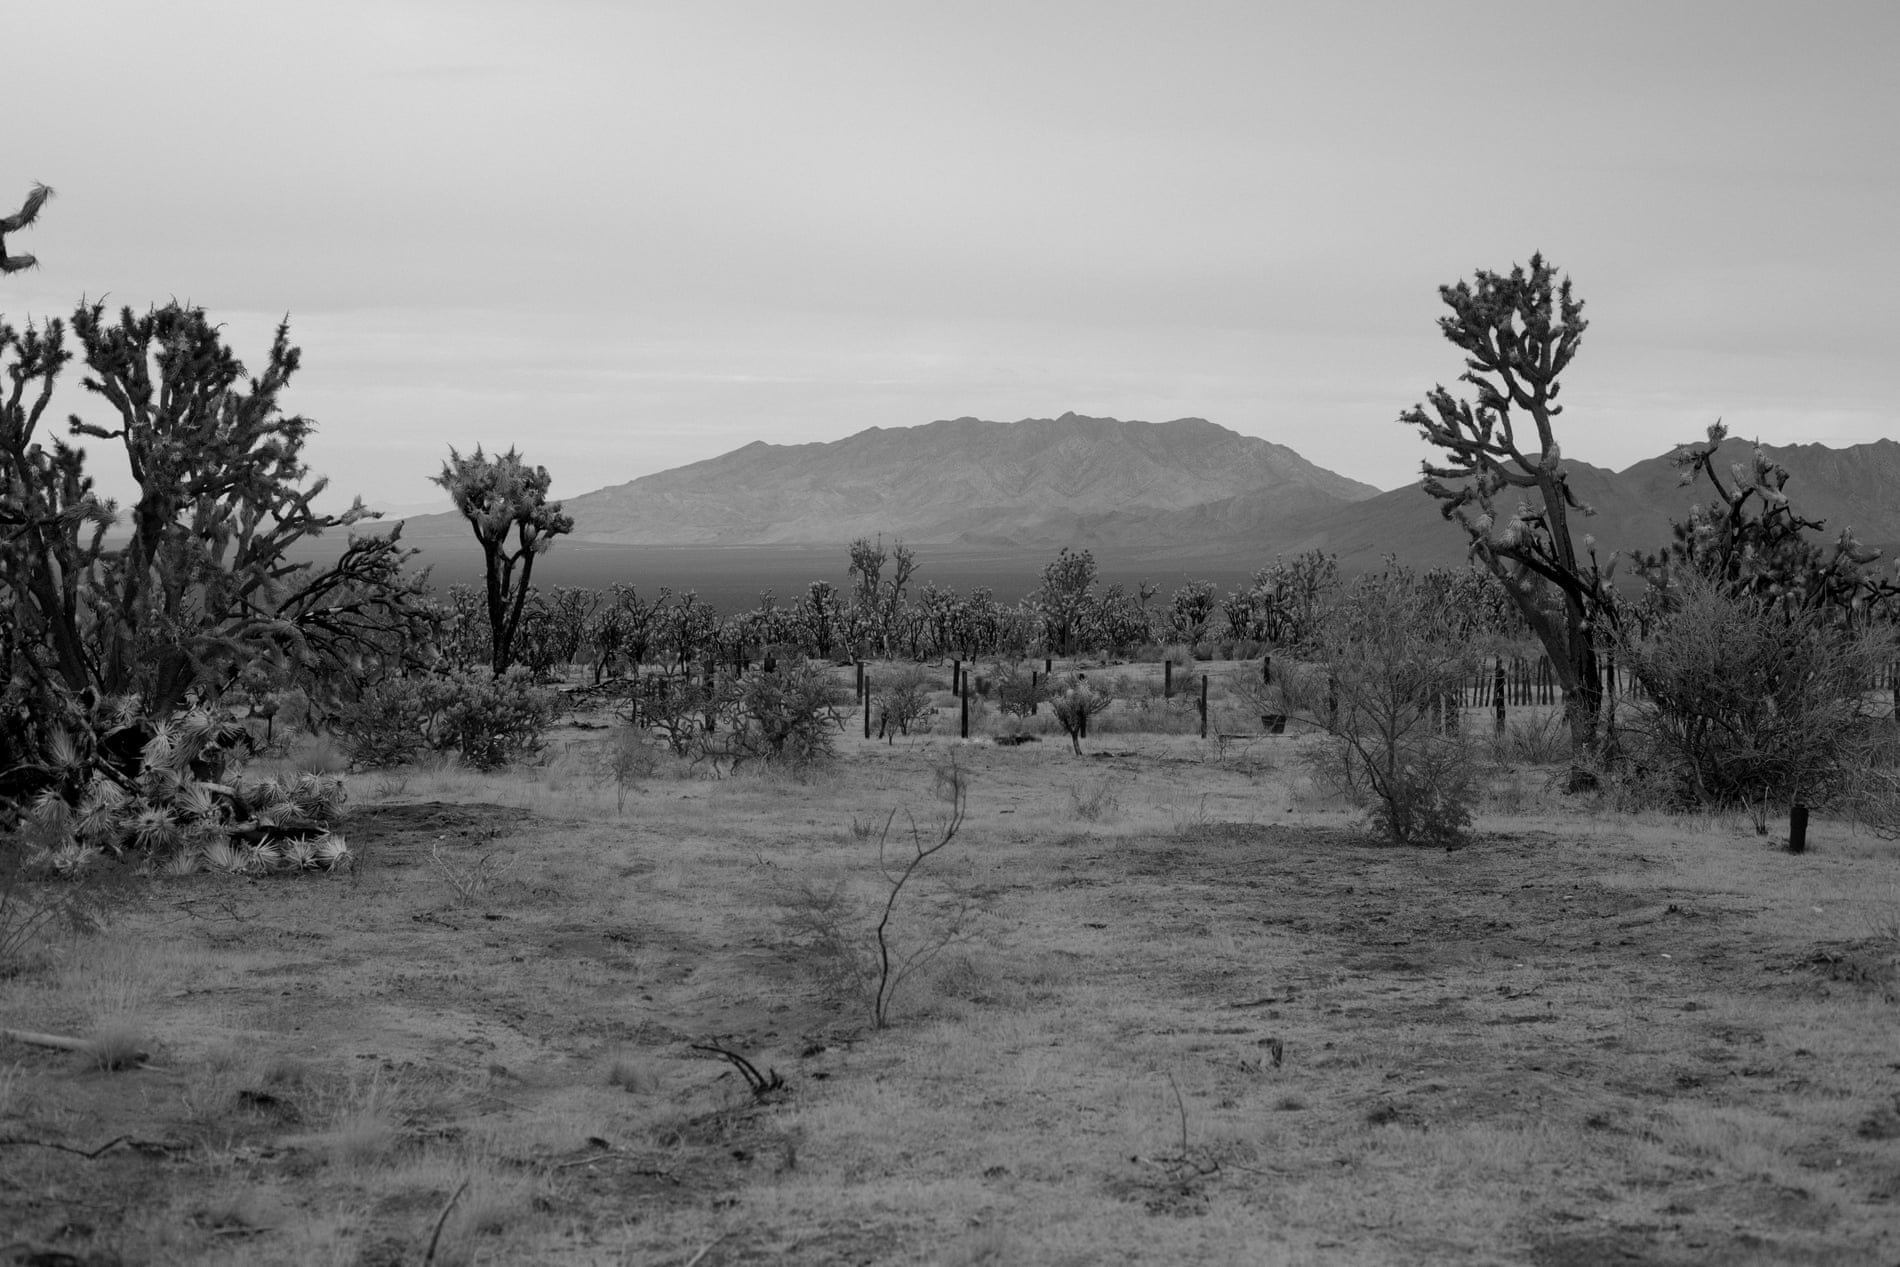 A field of Joshua Trees in the desert.